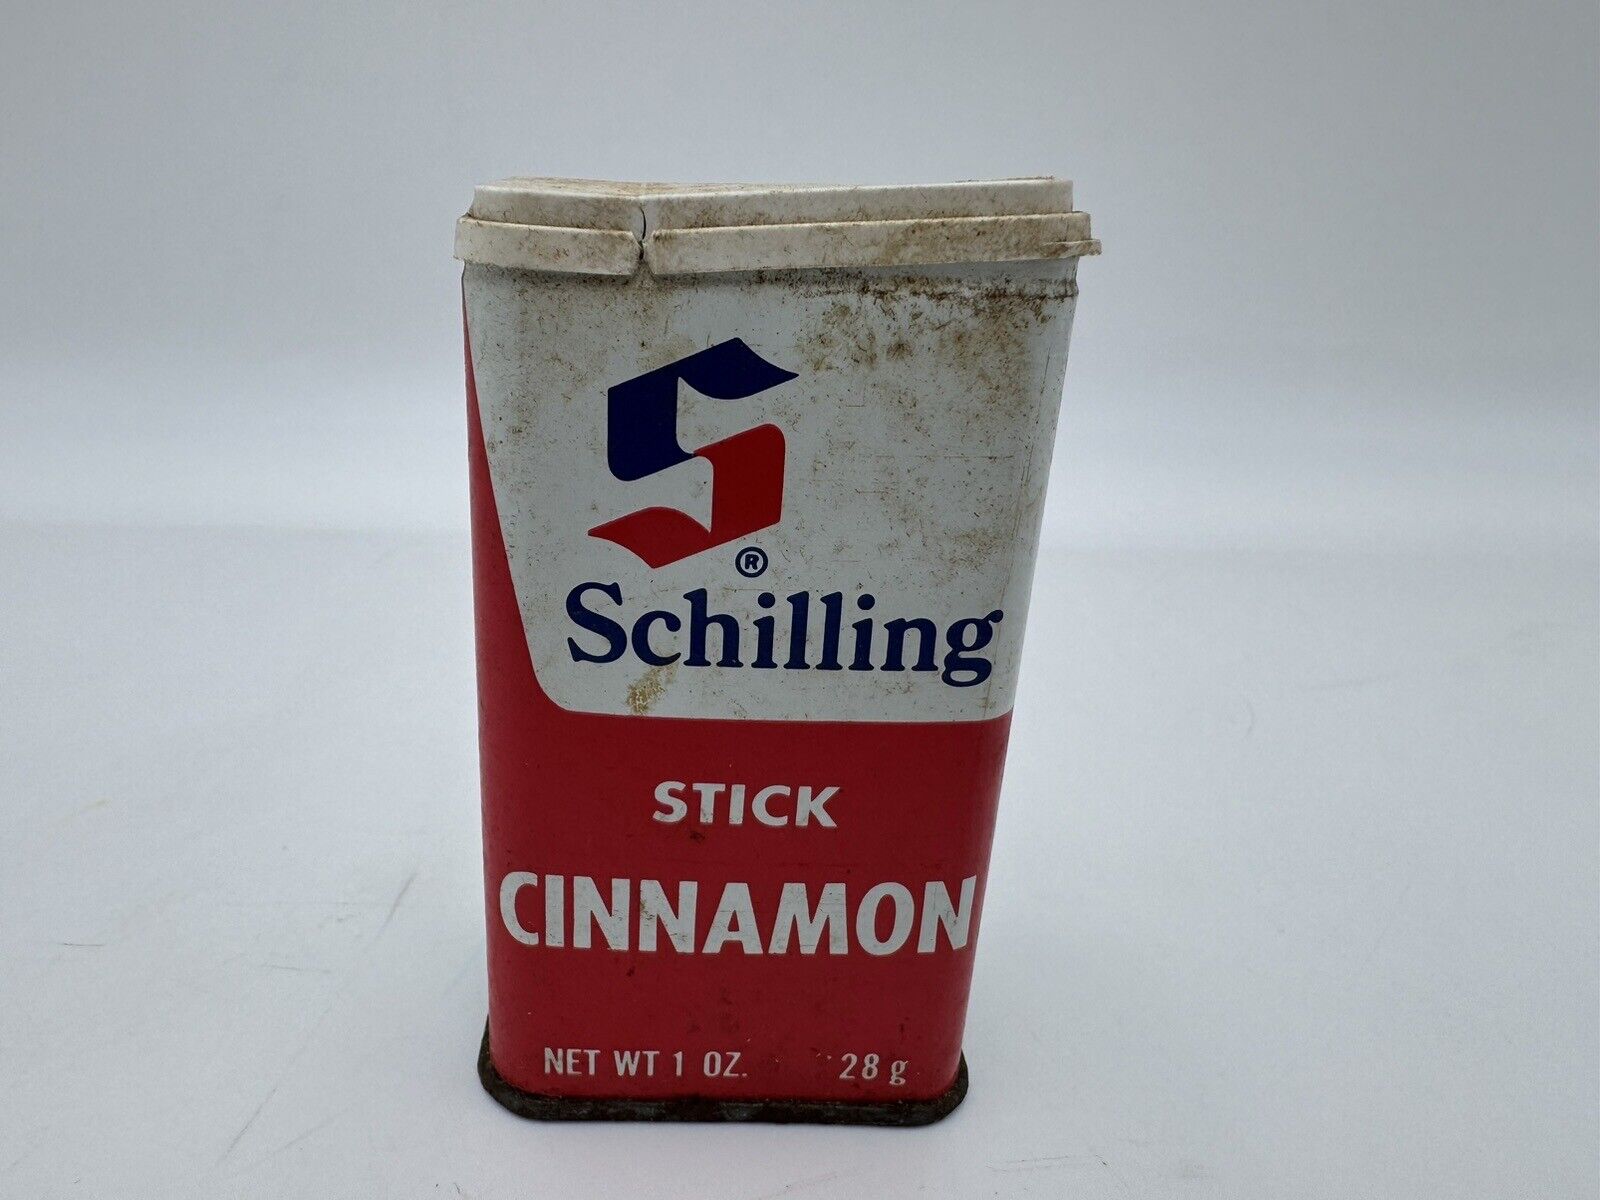 Antique Schilling Cinnamon Sticks 1oz Metal Can Tin Canister - Full Mccormick